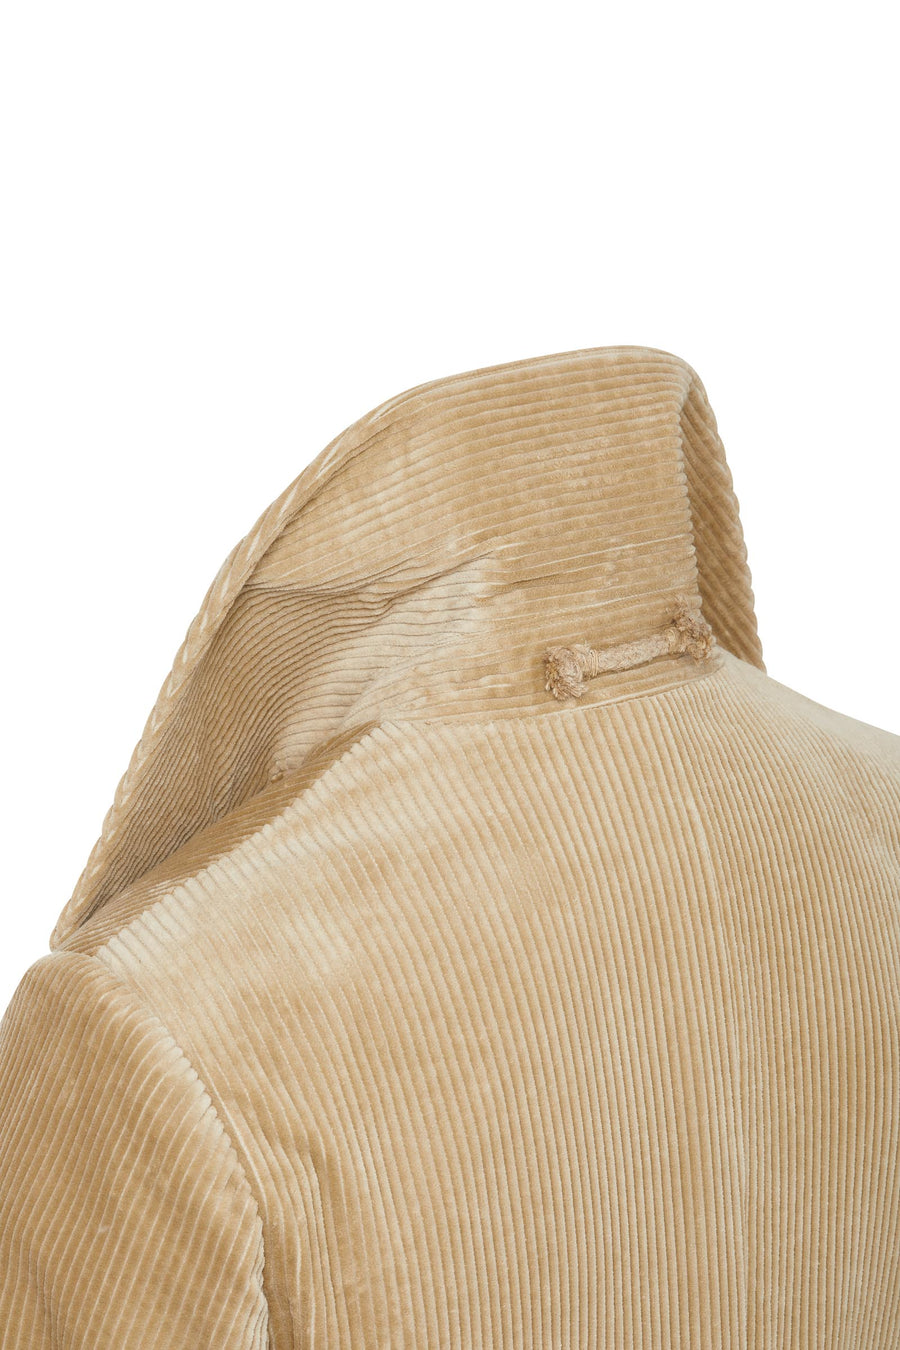 Big collar (back view) on Luxury men's beige corduroy jacket with black and white wool/cotton lining